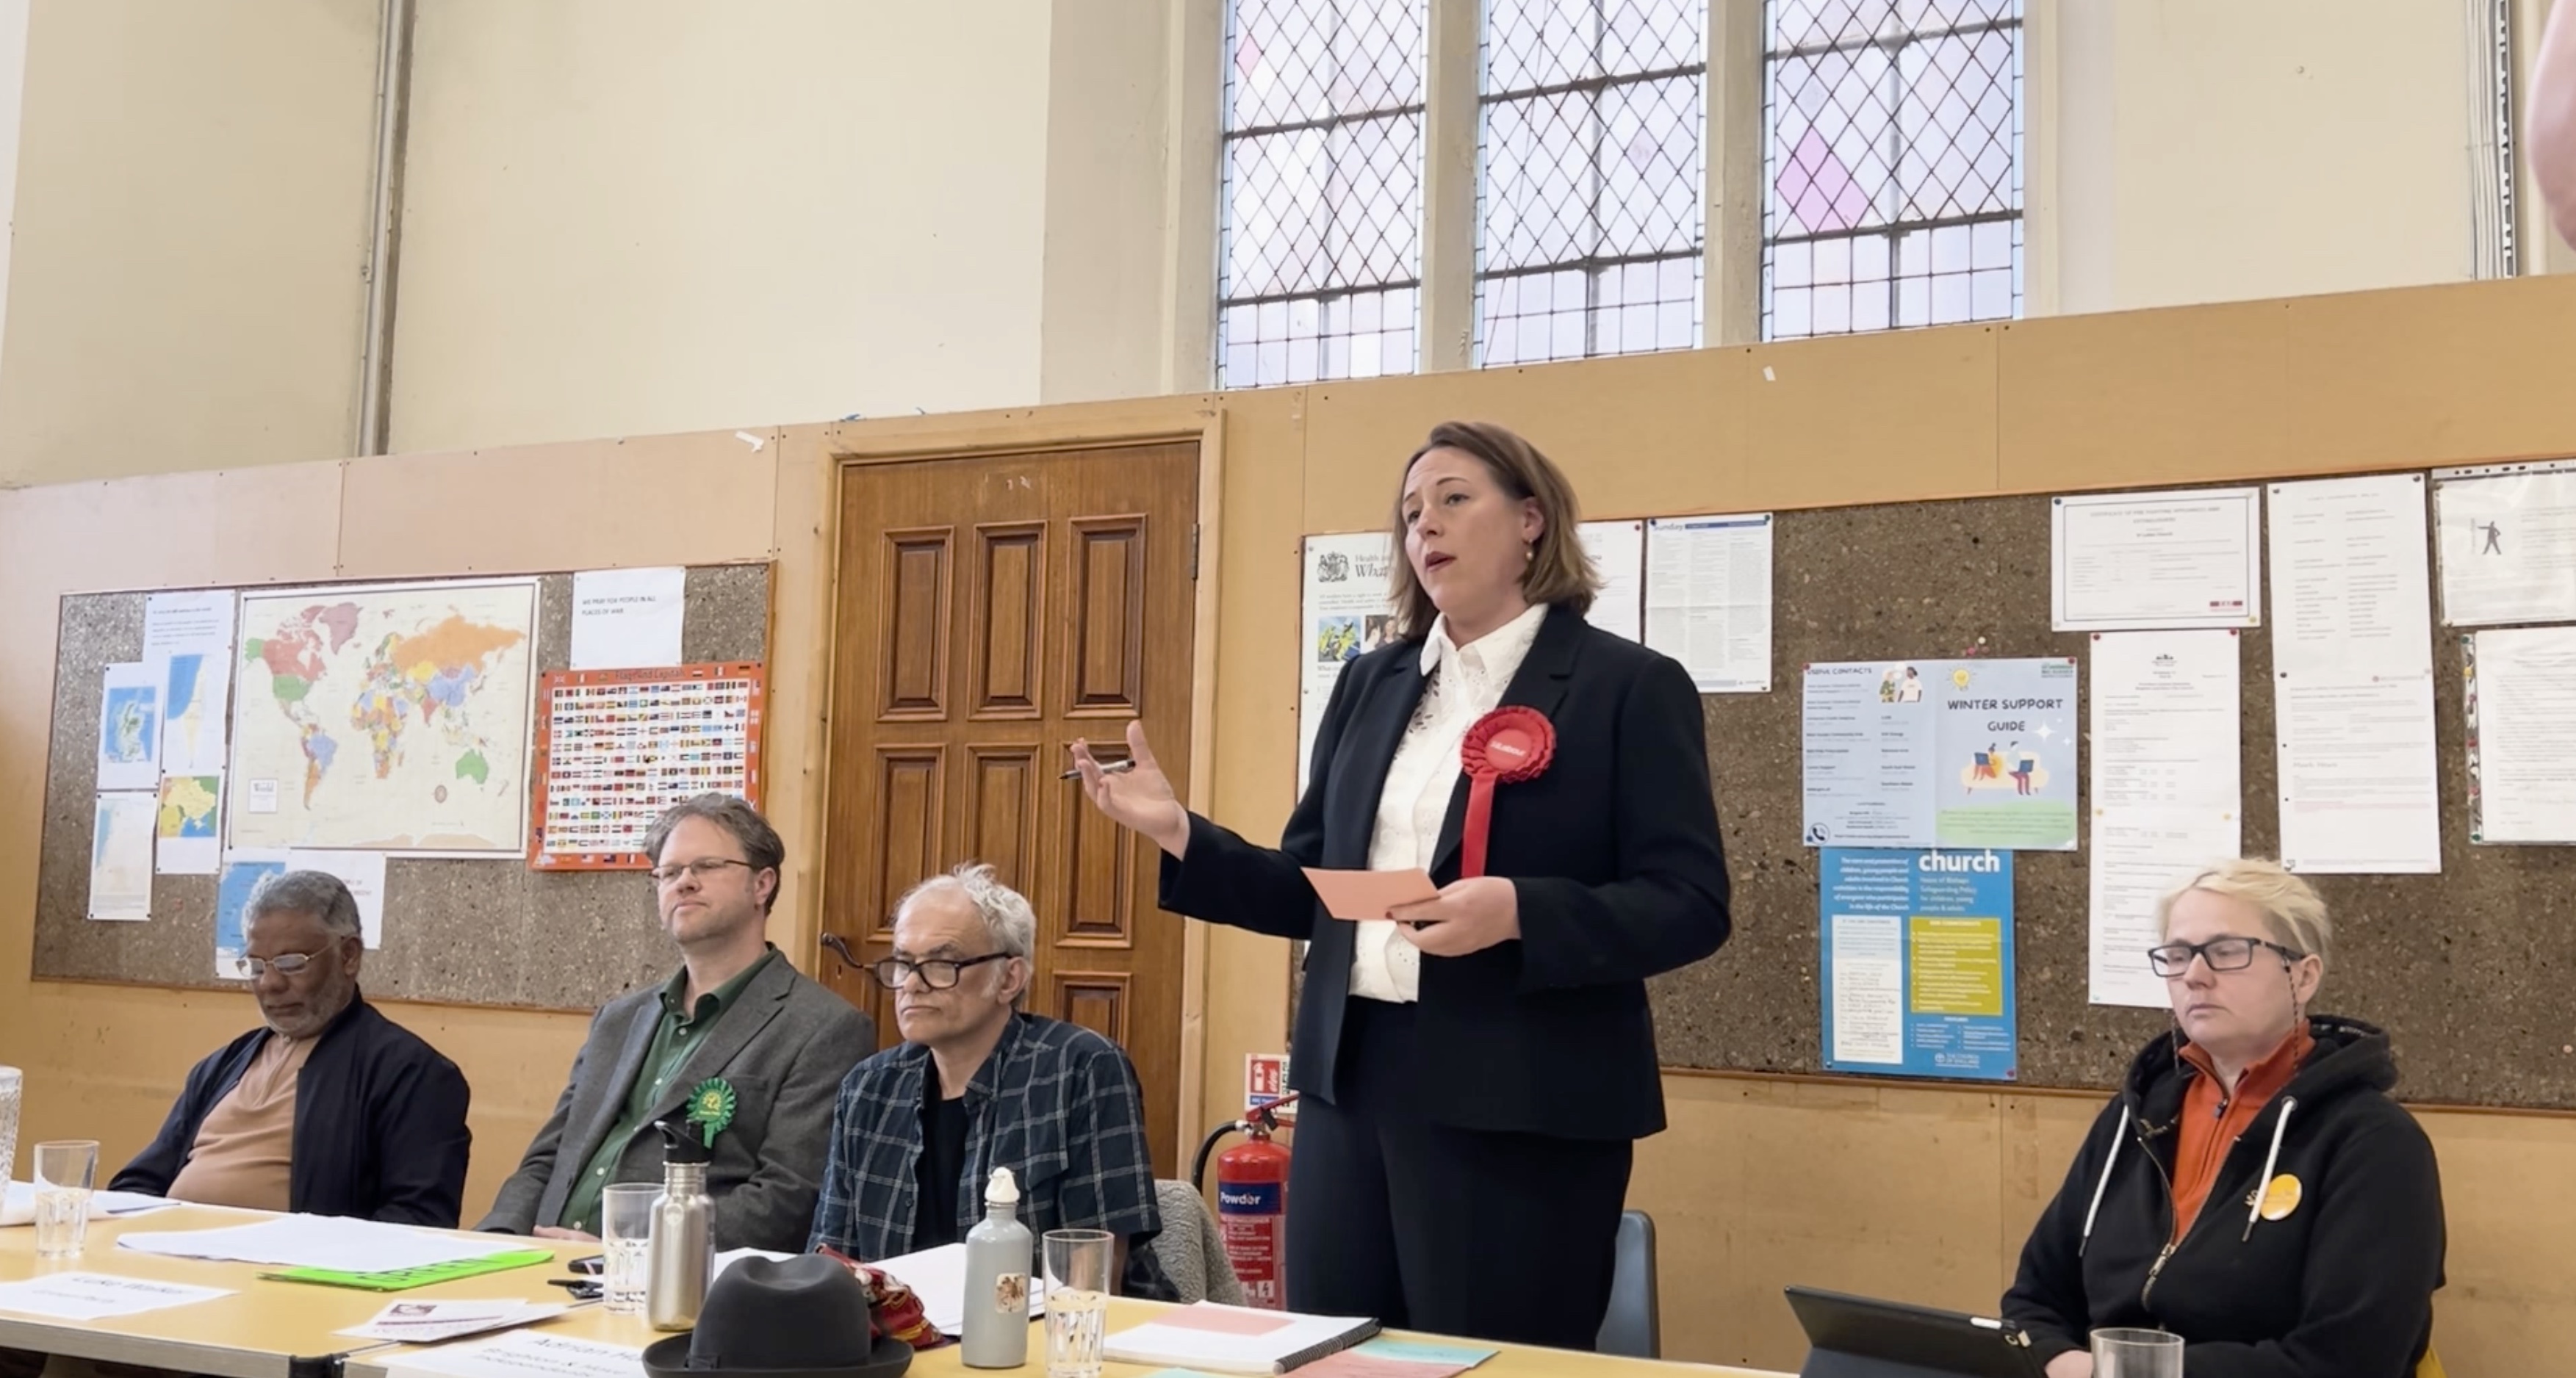 WATCH: QUEEN'S PARK BY-ELECTION WARD HUSTINGS - Latest TV Brighton